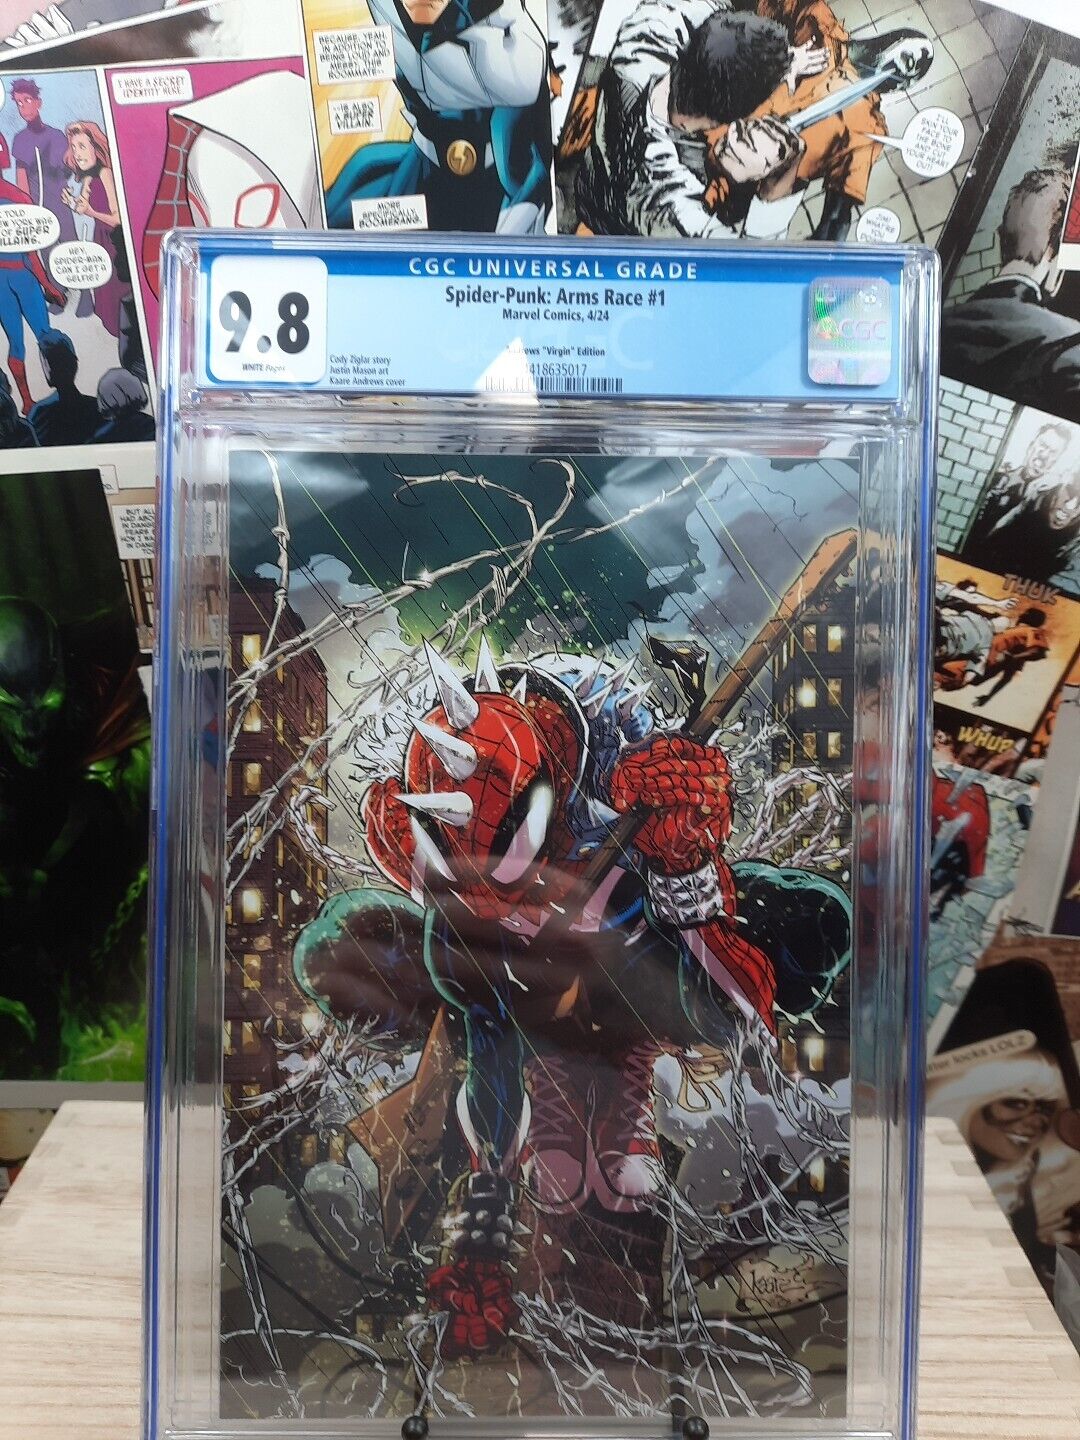 Spider-Punk #1 Arms Race CGC 9.8 NM Kaare Andrews EXCLUSIVE Limited VIRGIN 🔥 